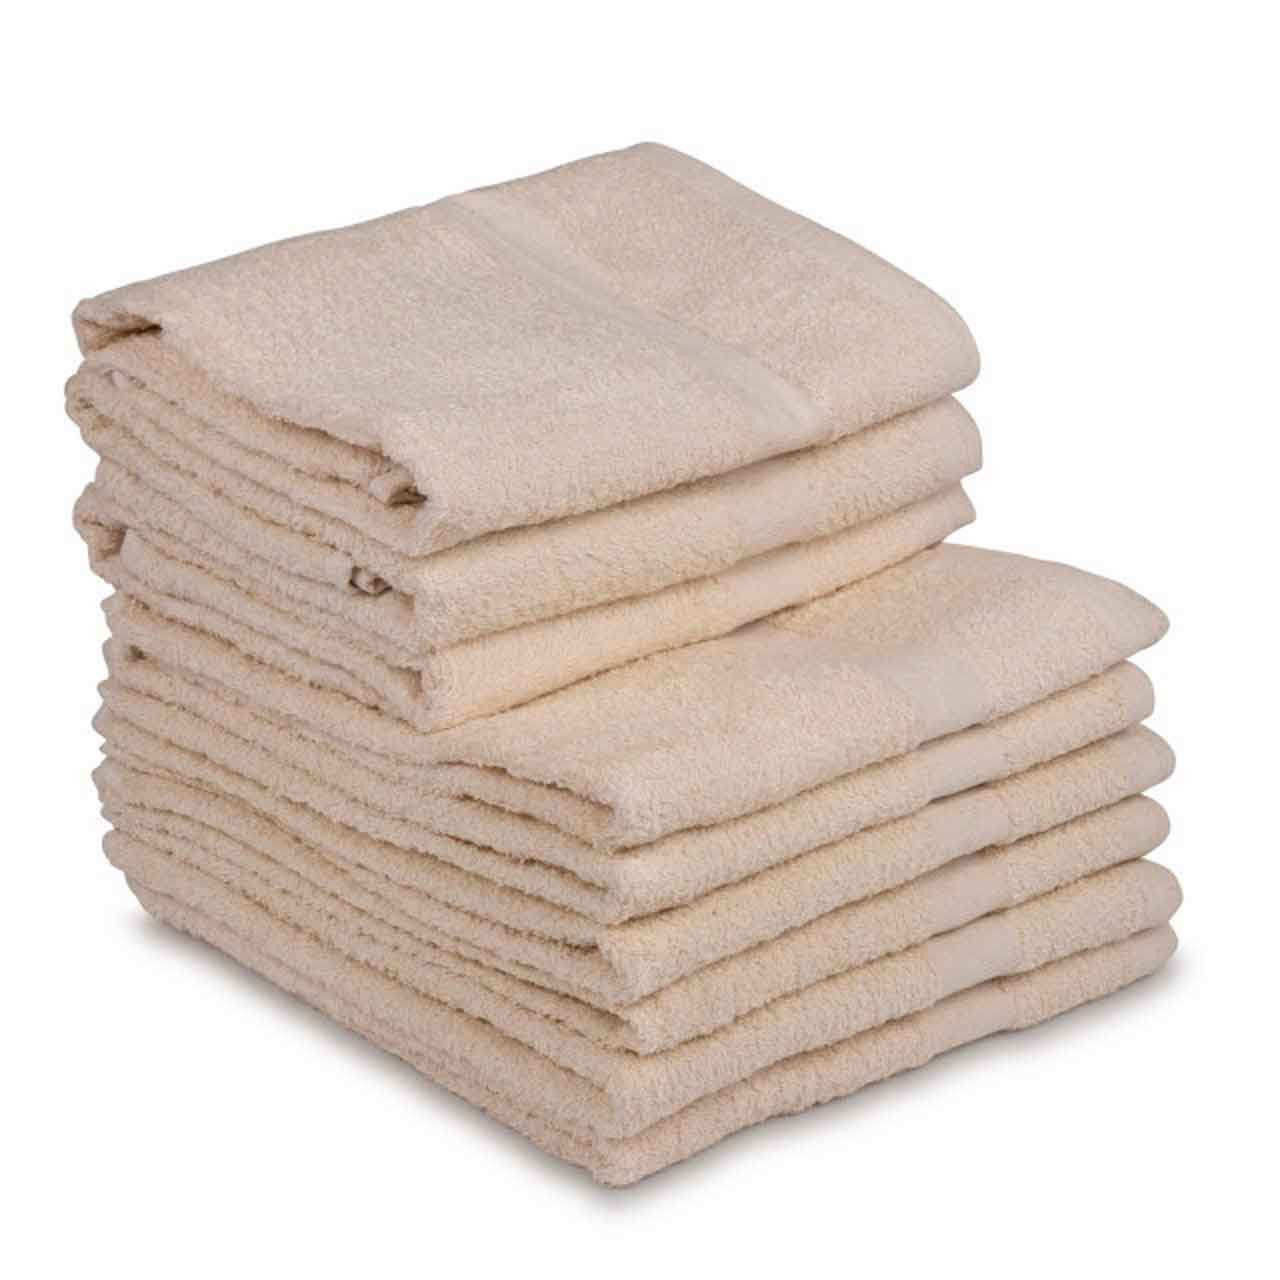 How to wash cotton towels?